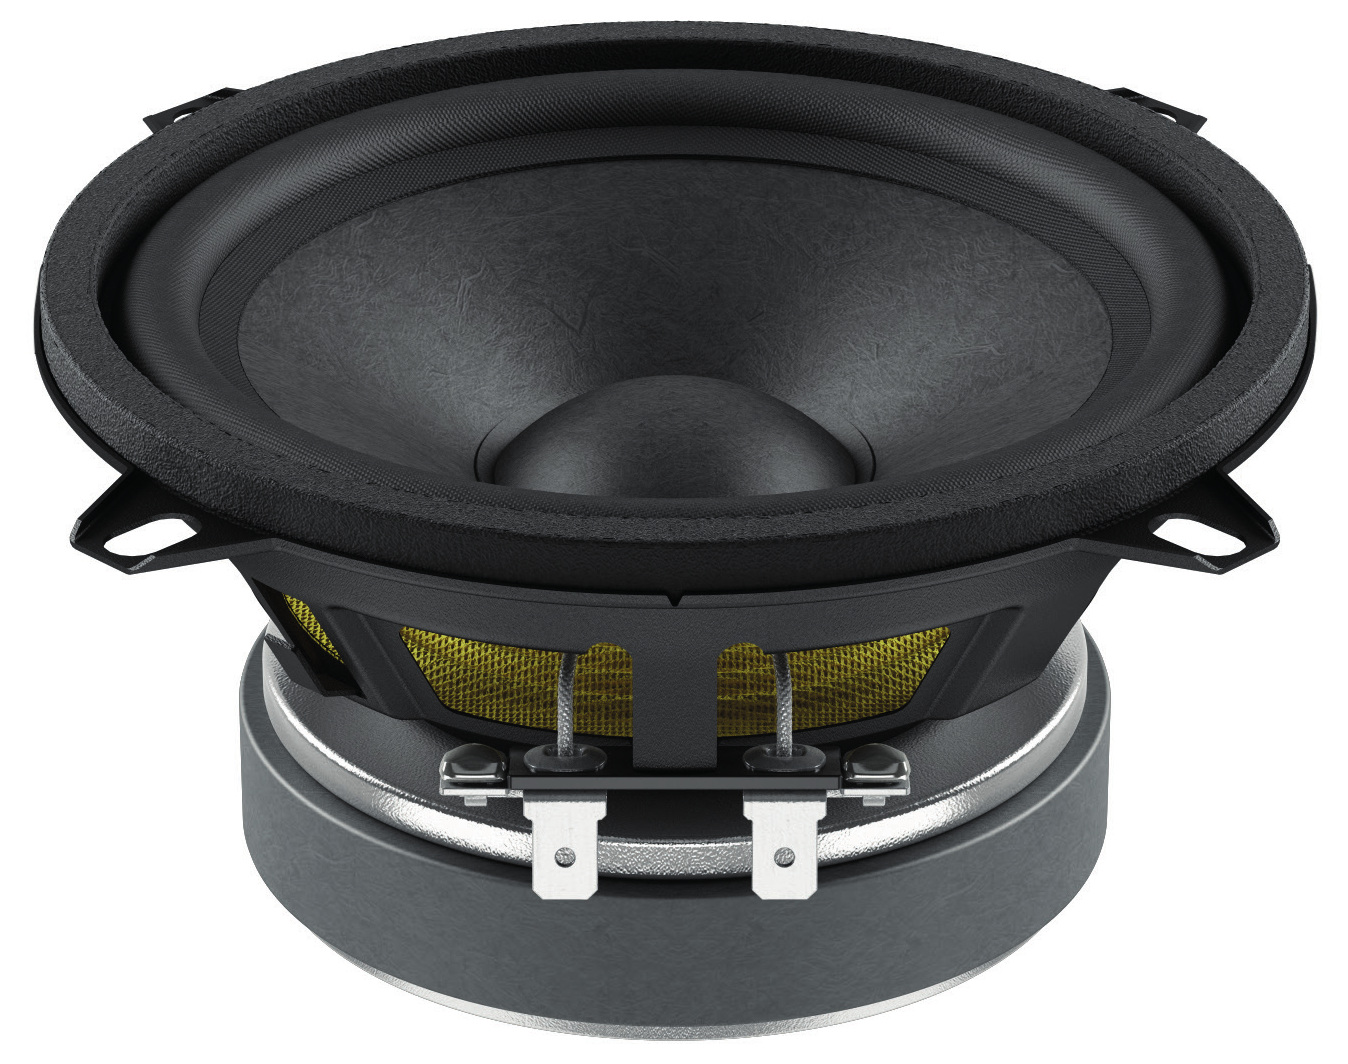 LaVoce WSF051.02 Woofer